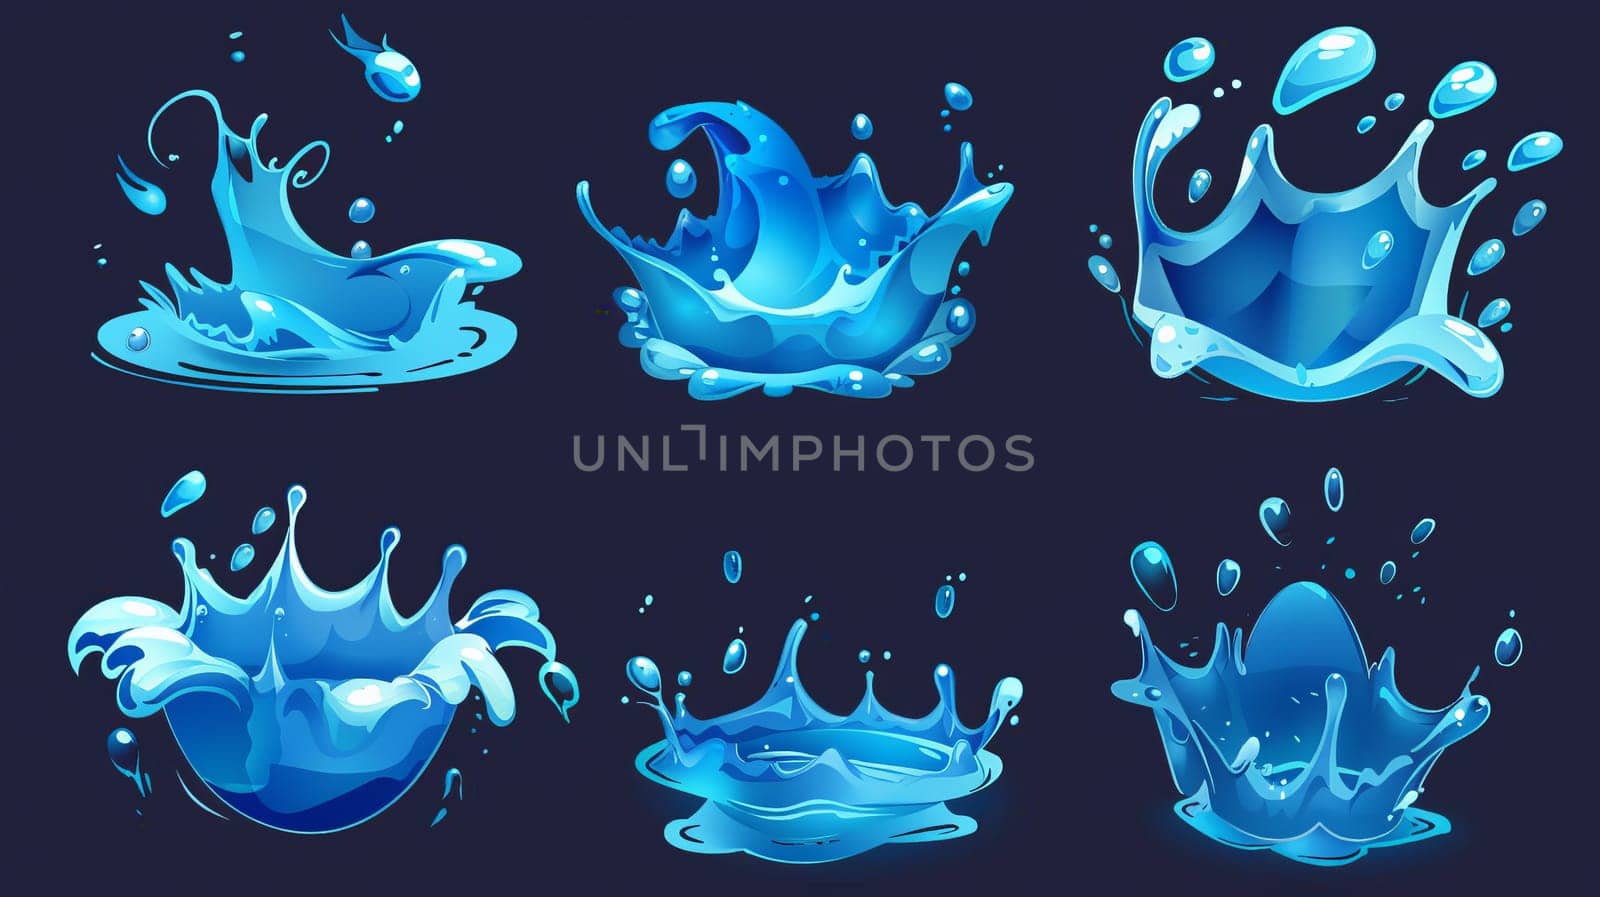 There is a splash of liquid water, falling drops, waves and swirls on the surface of the ocean or sea, floating in the stream and spilling into a crown shape, in a modern cartoon set of motion by Andrei_01